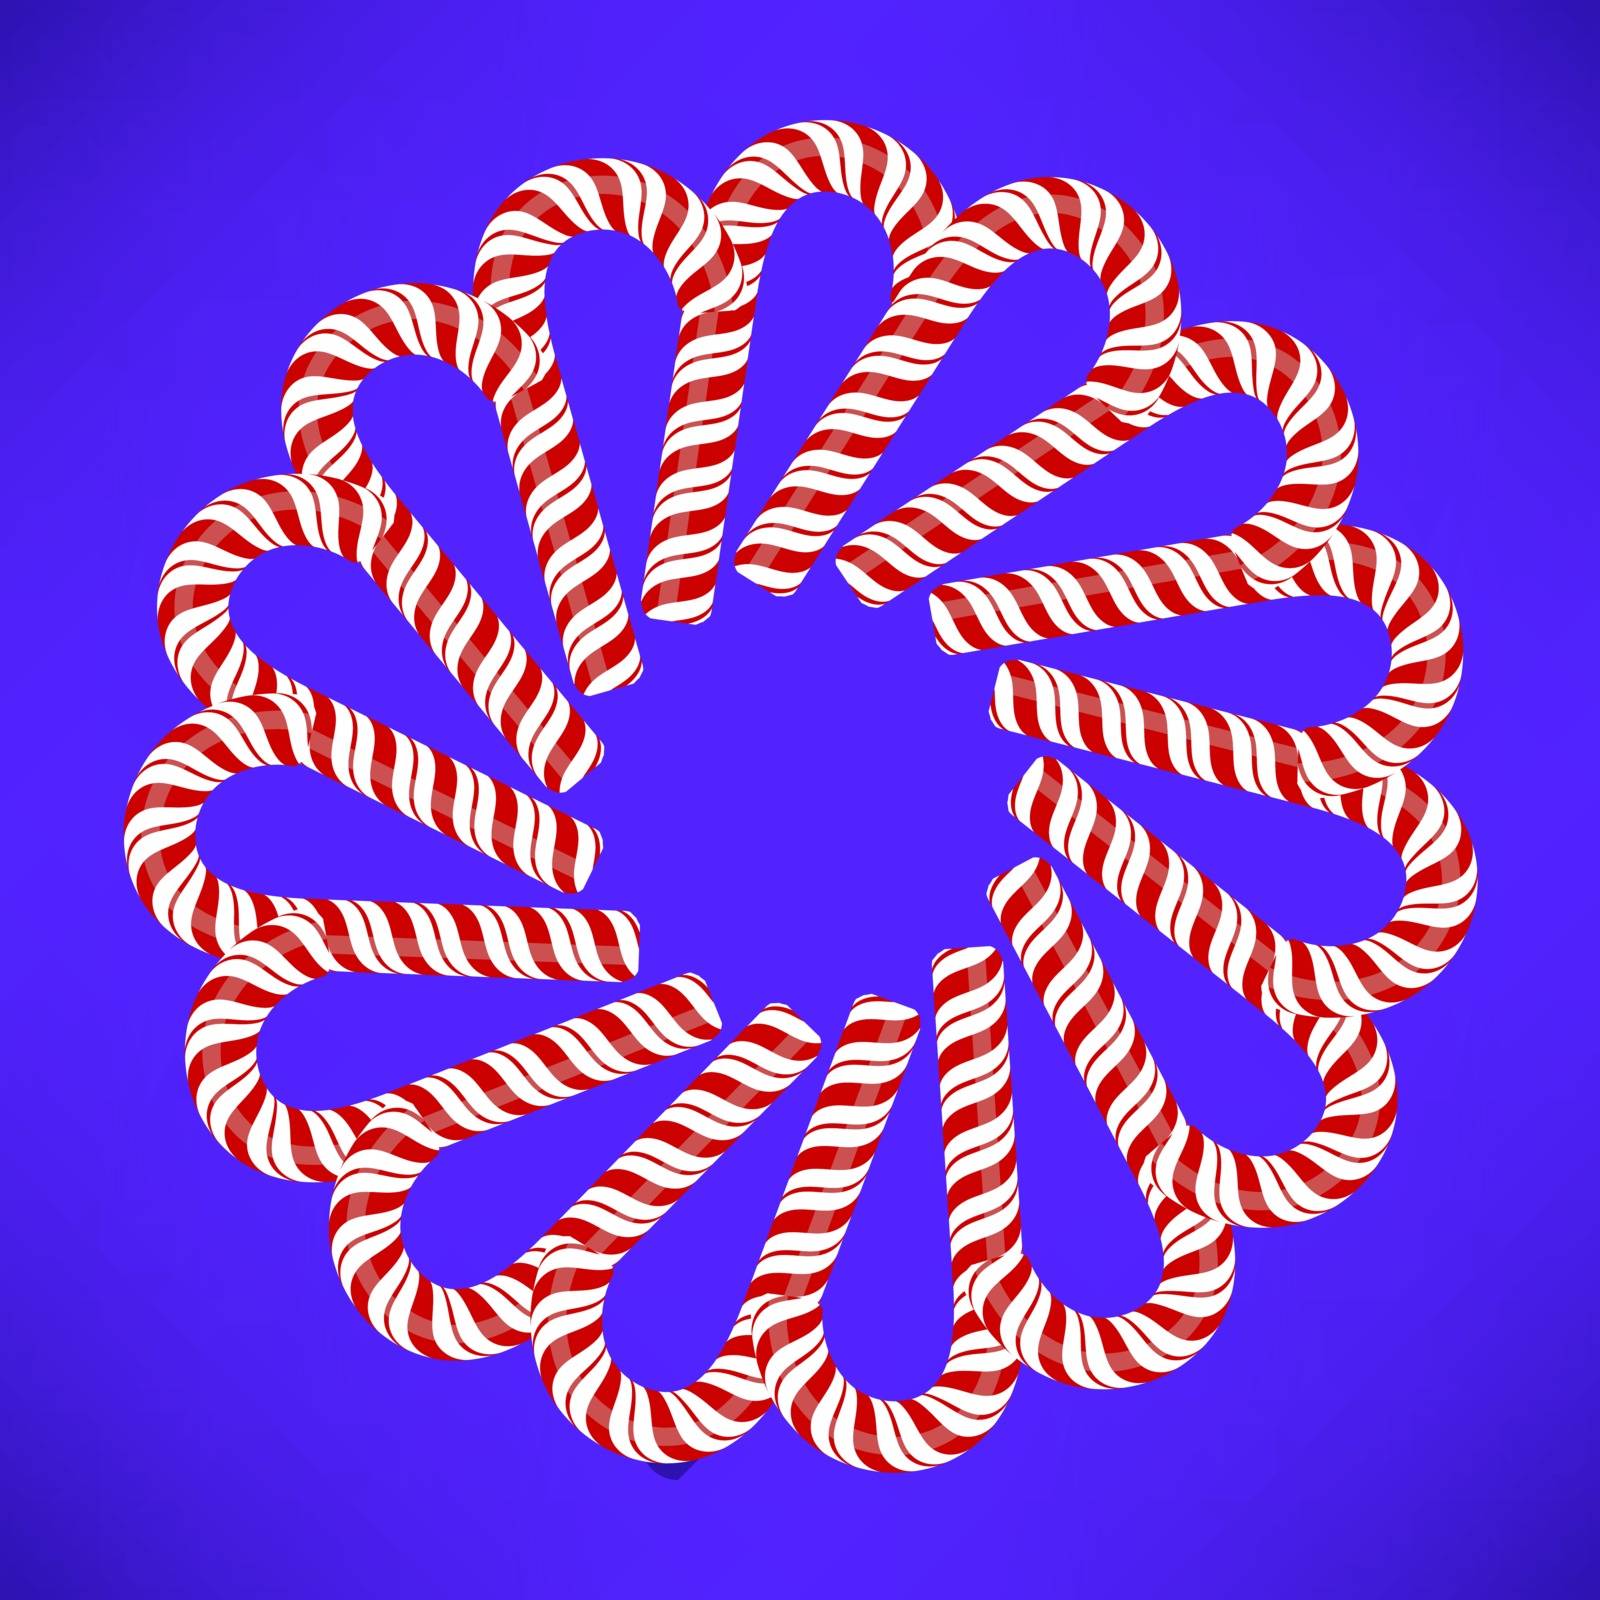 Striped Candy Ornament Isolated on Blue Background